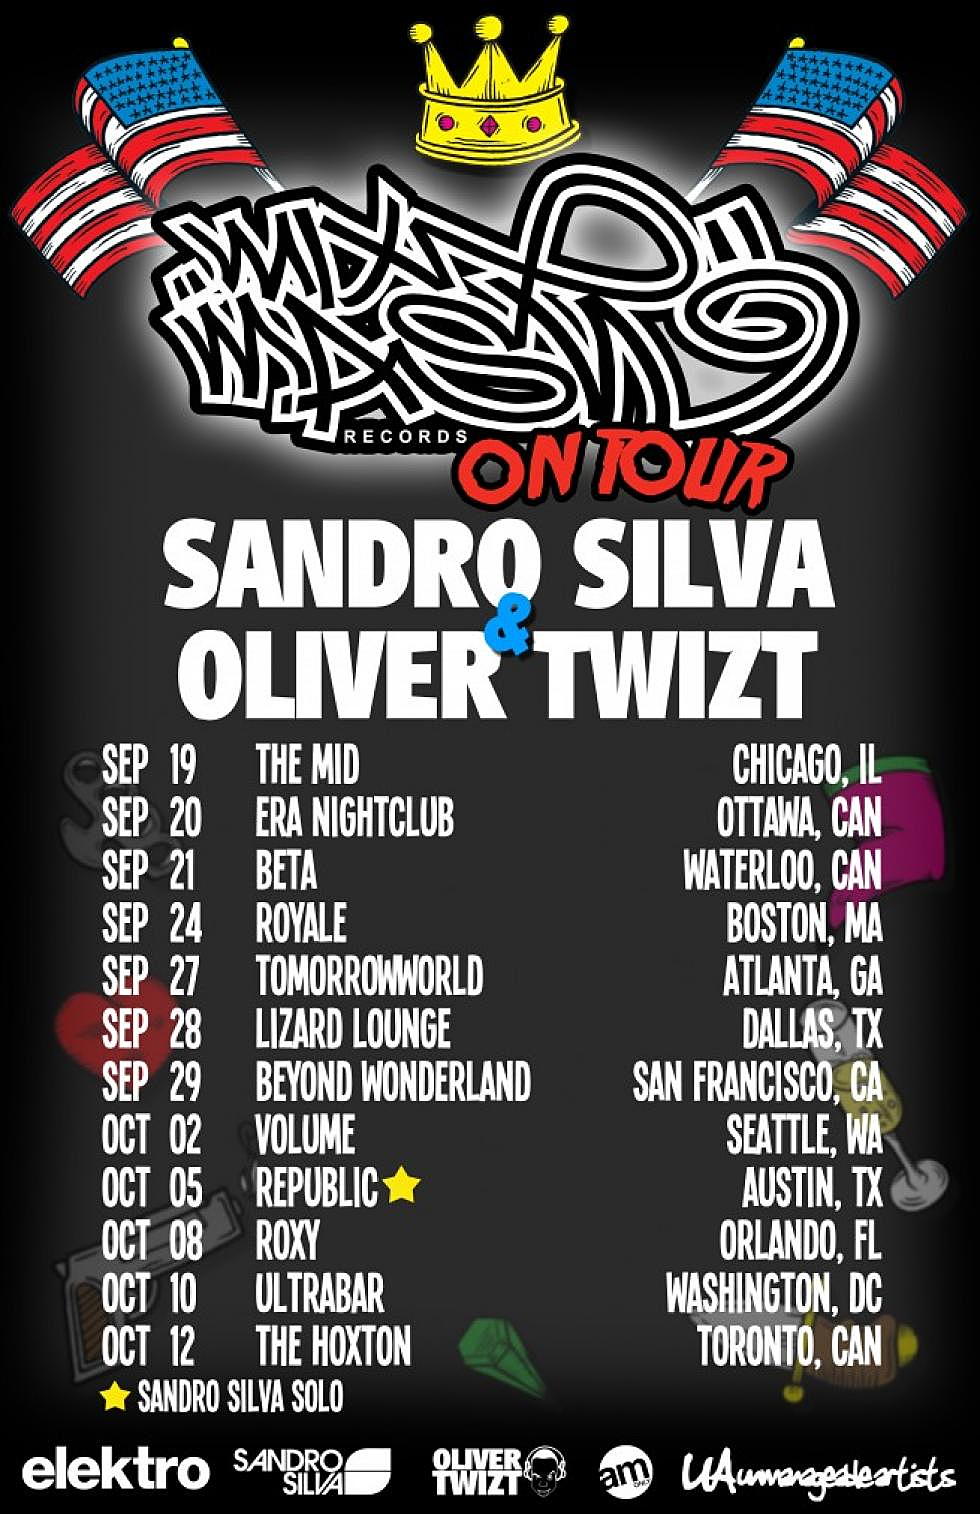 Mixmash Records On Tour featuring Sandro Silva and Oliver Twizt